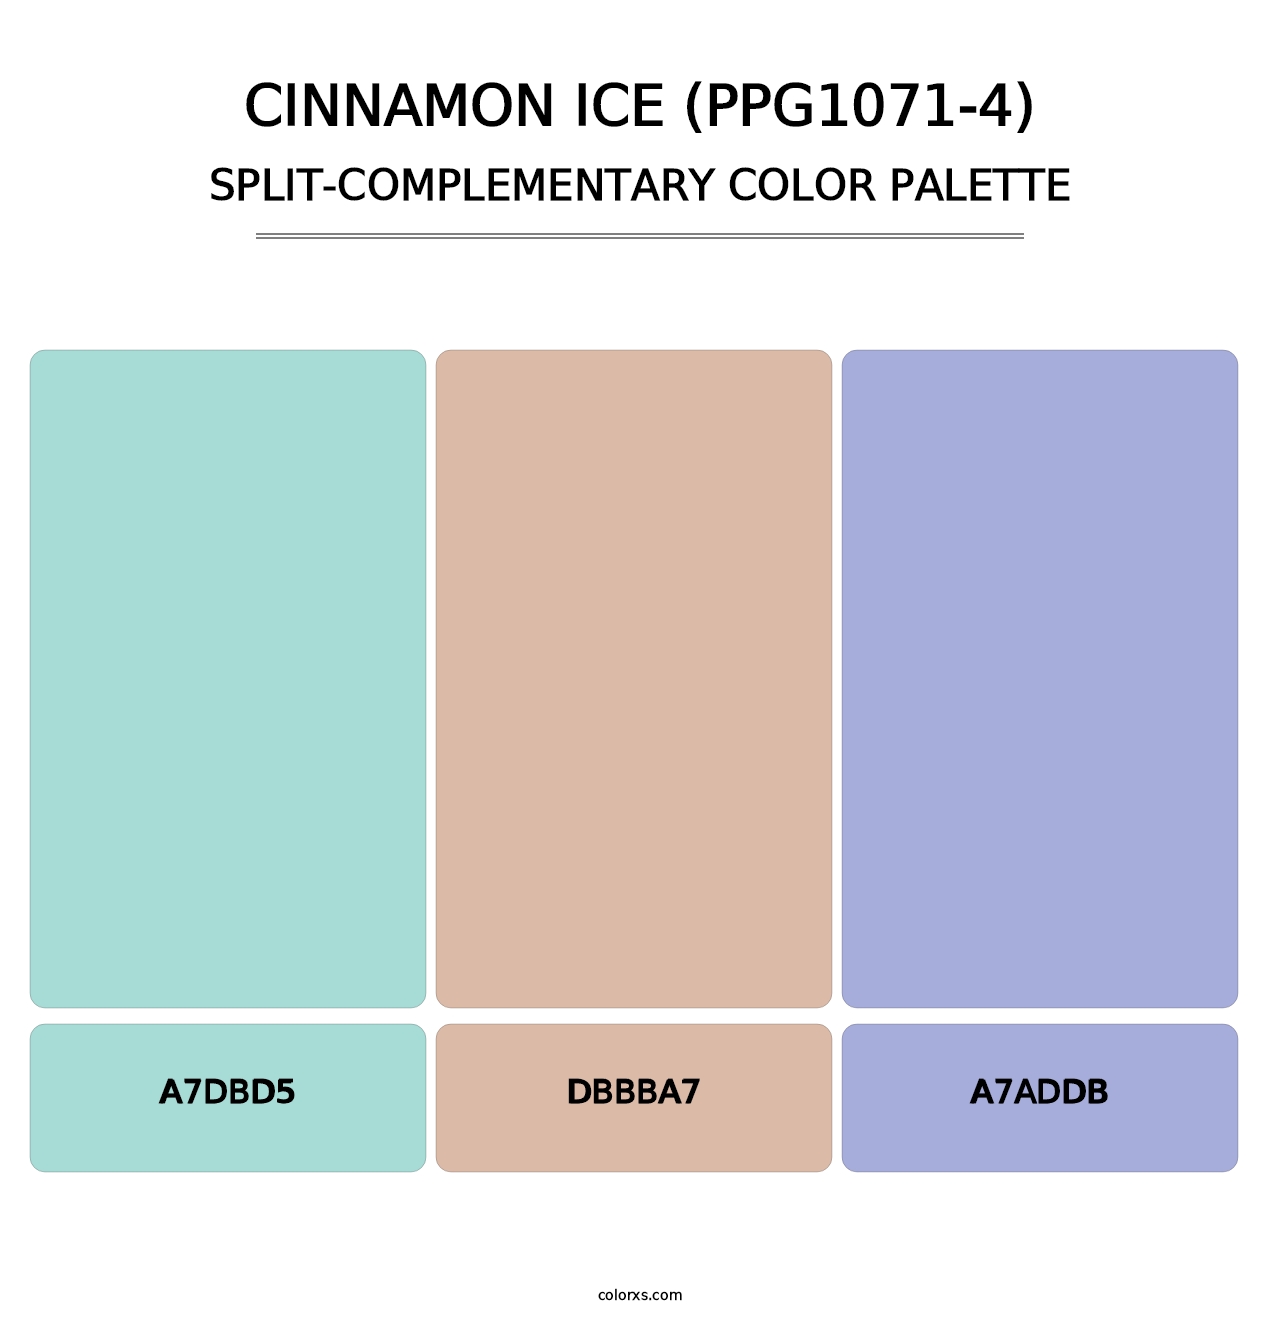 Cinnamon Ice (PPG1071-4) - Split-Complementary Color Palette